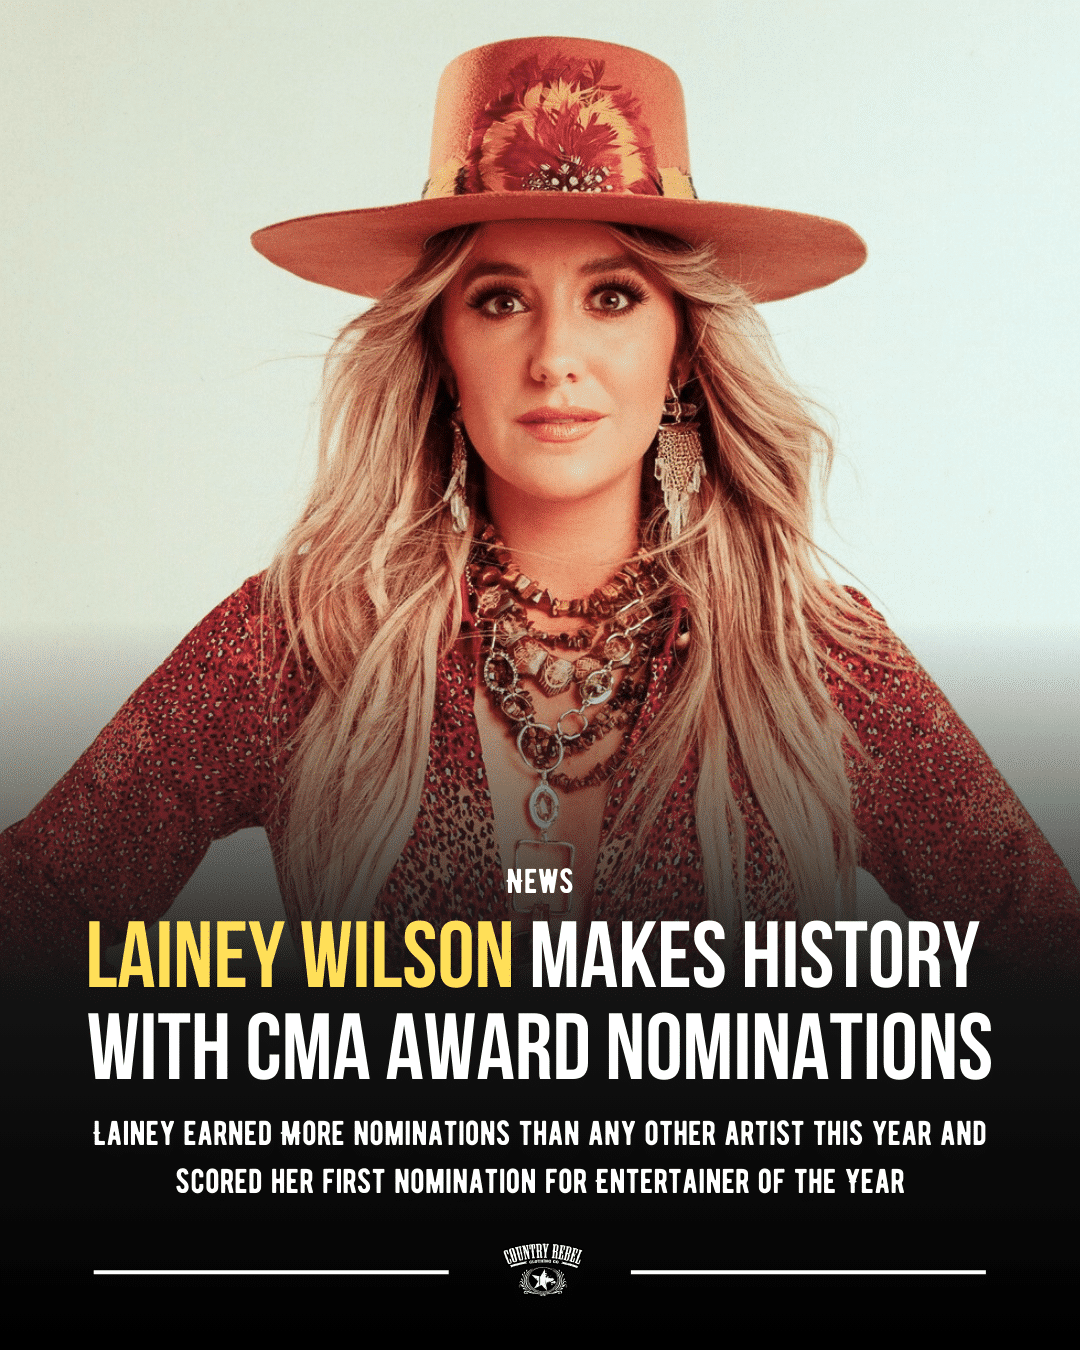 Lainey Wilson makes history with her CMA Award nominations